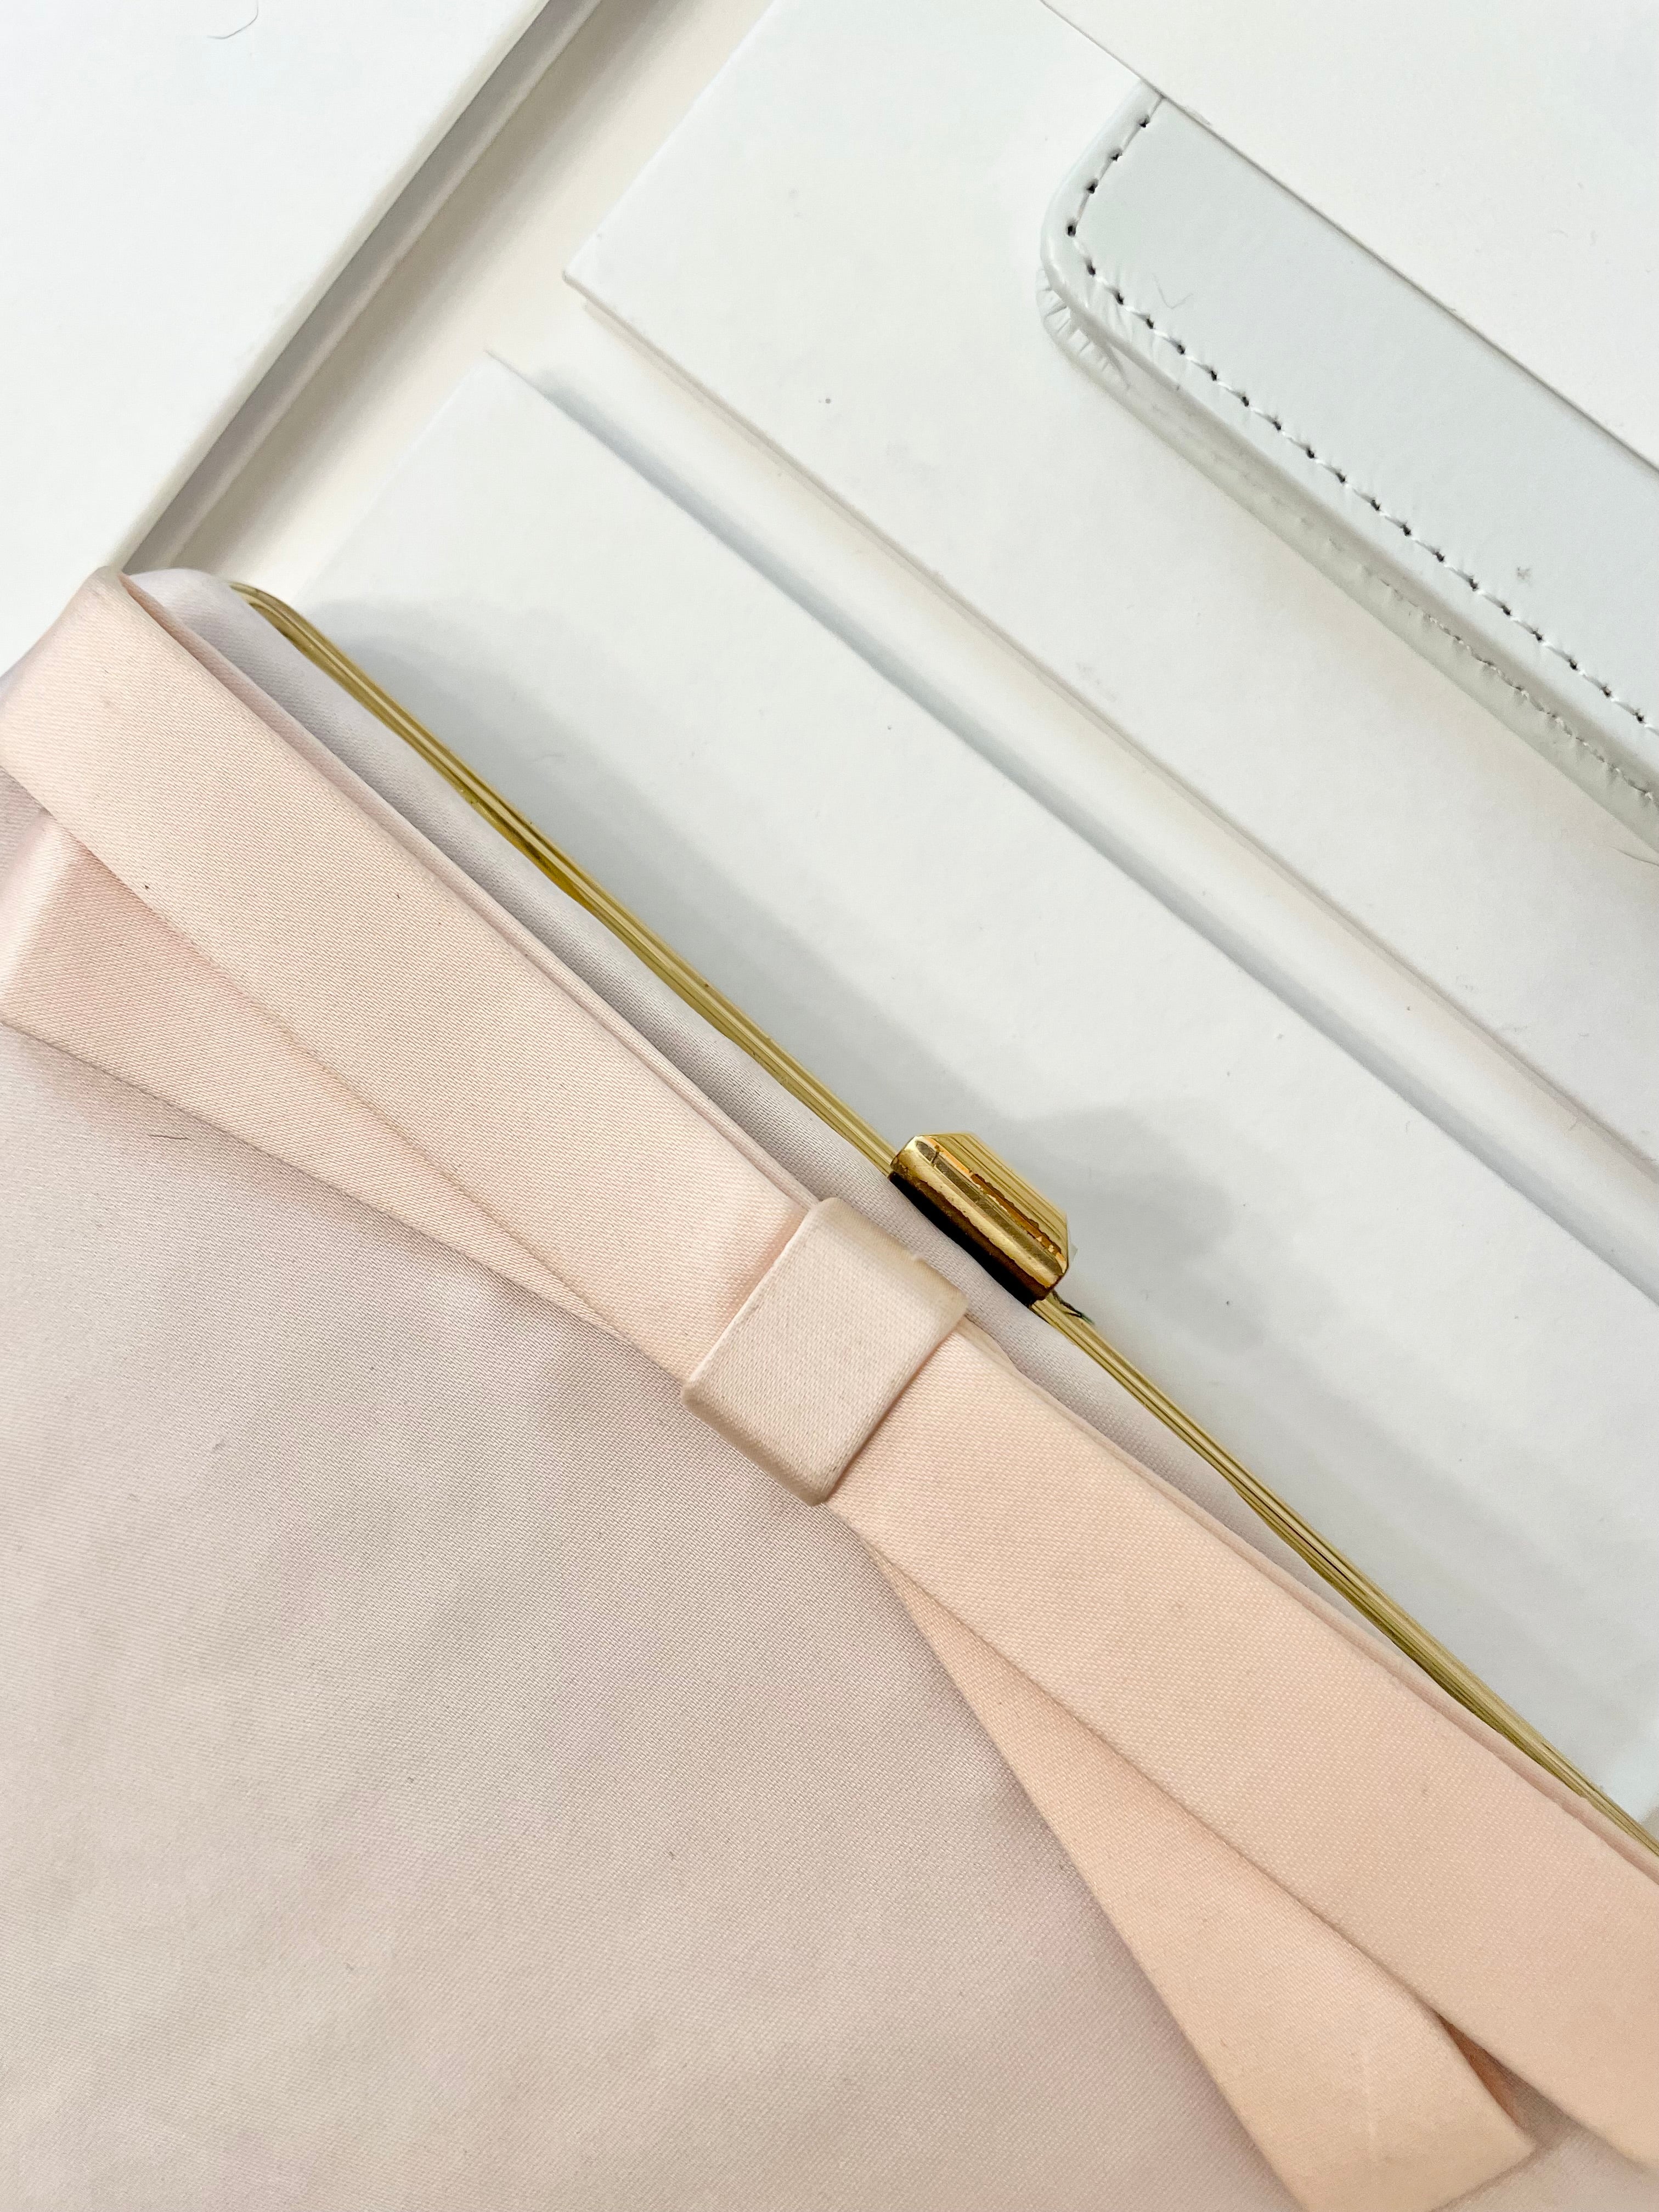 Vintage flirty gal and her love of soft pink.. this satin bow clutch is so pretty!